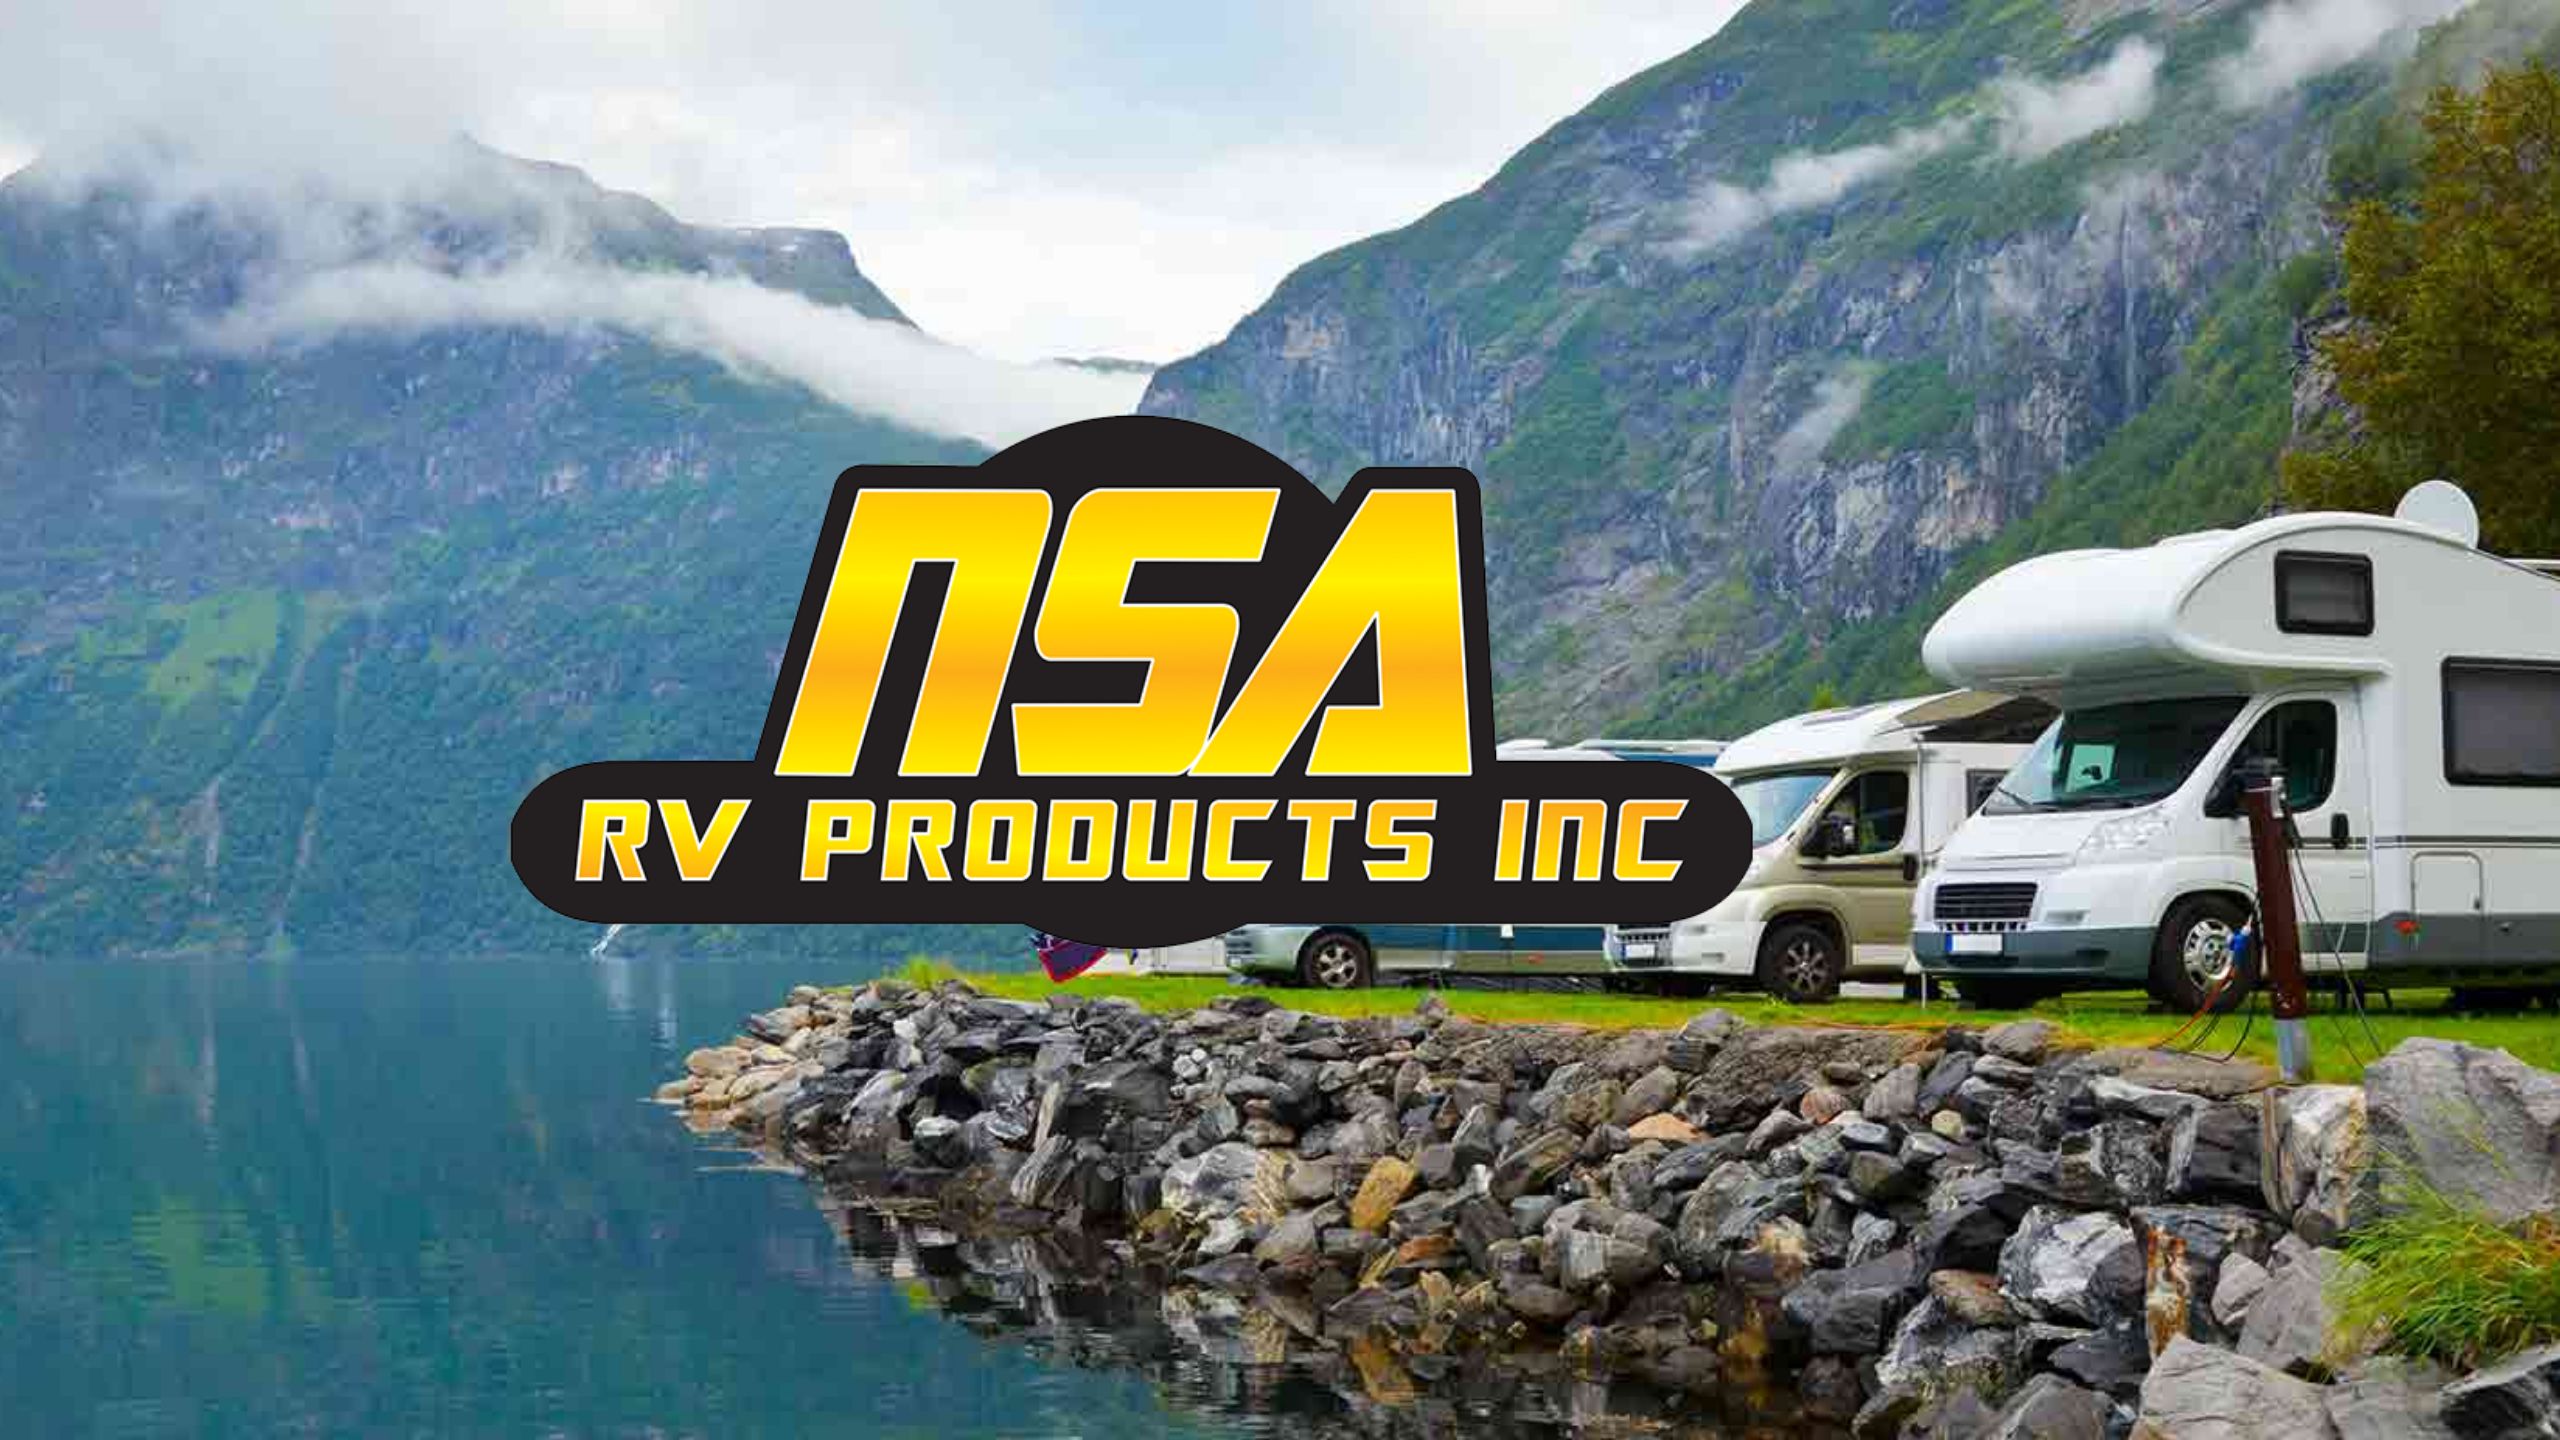 nsarvproducts.com